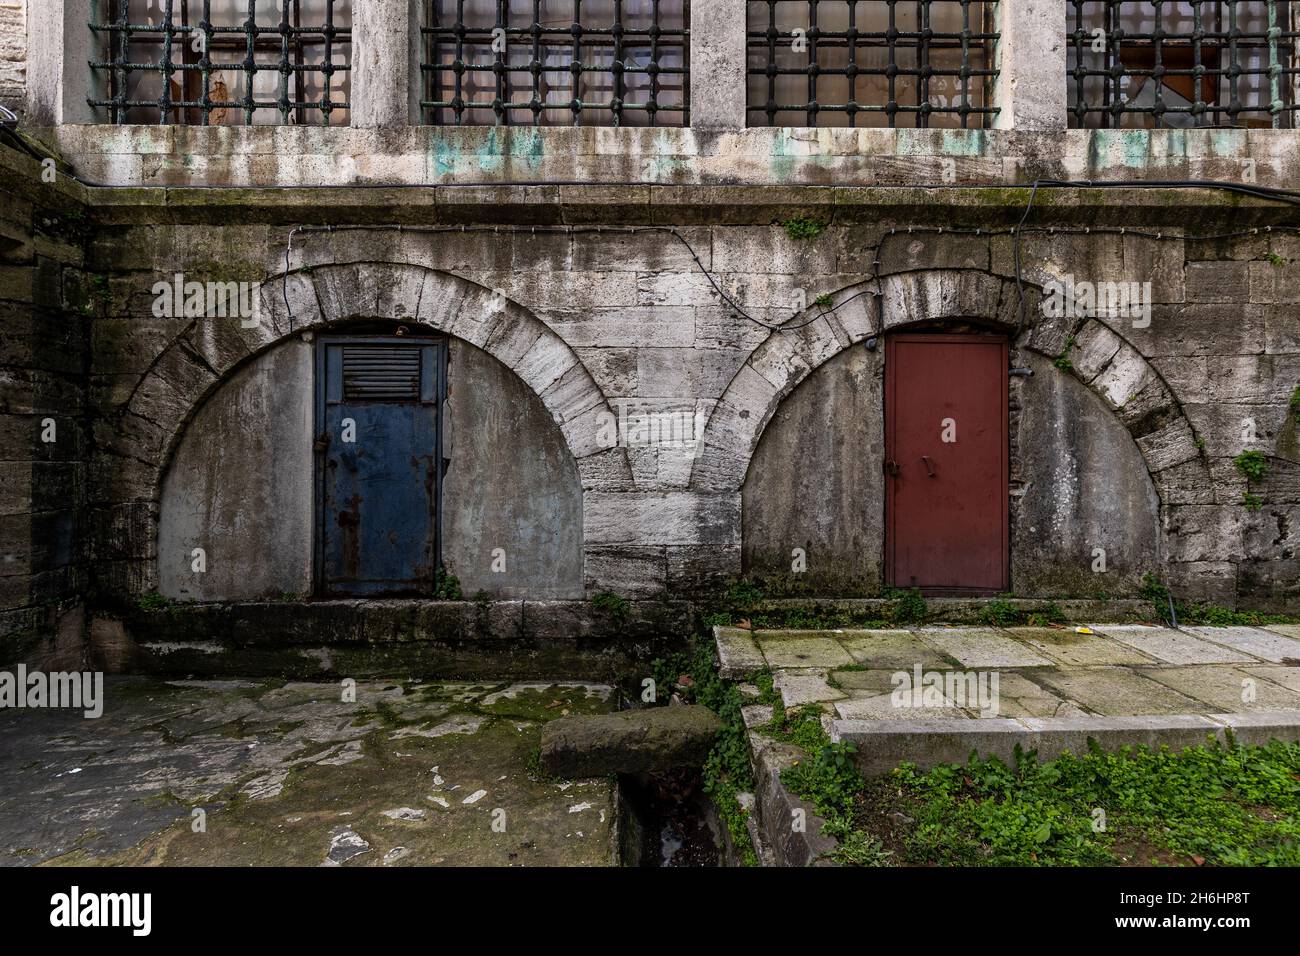 Dirty and worn stone wall and arch gate of a mosque in Istanbul Stock Photo